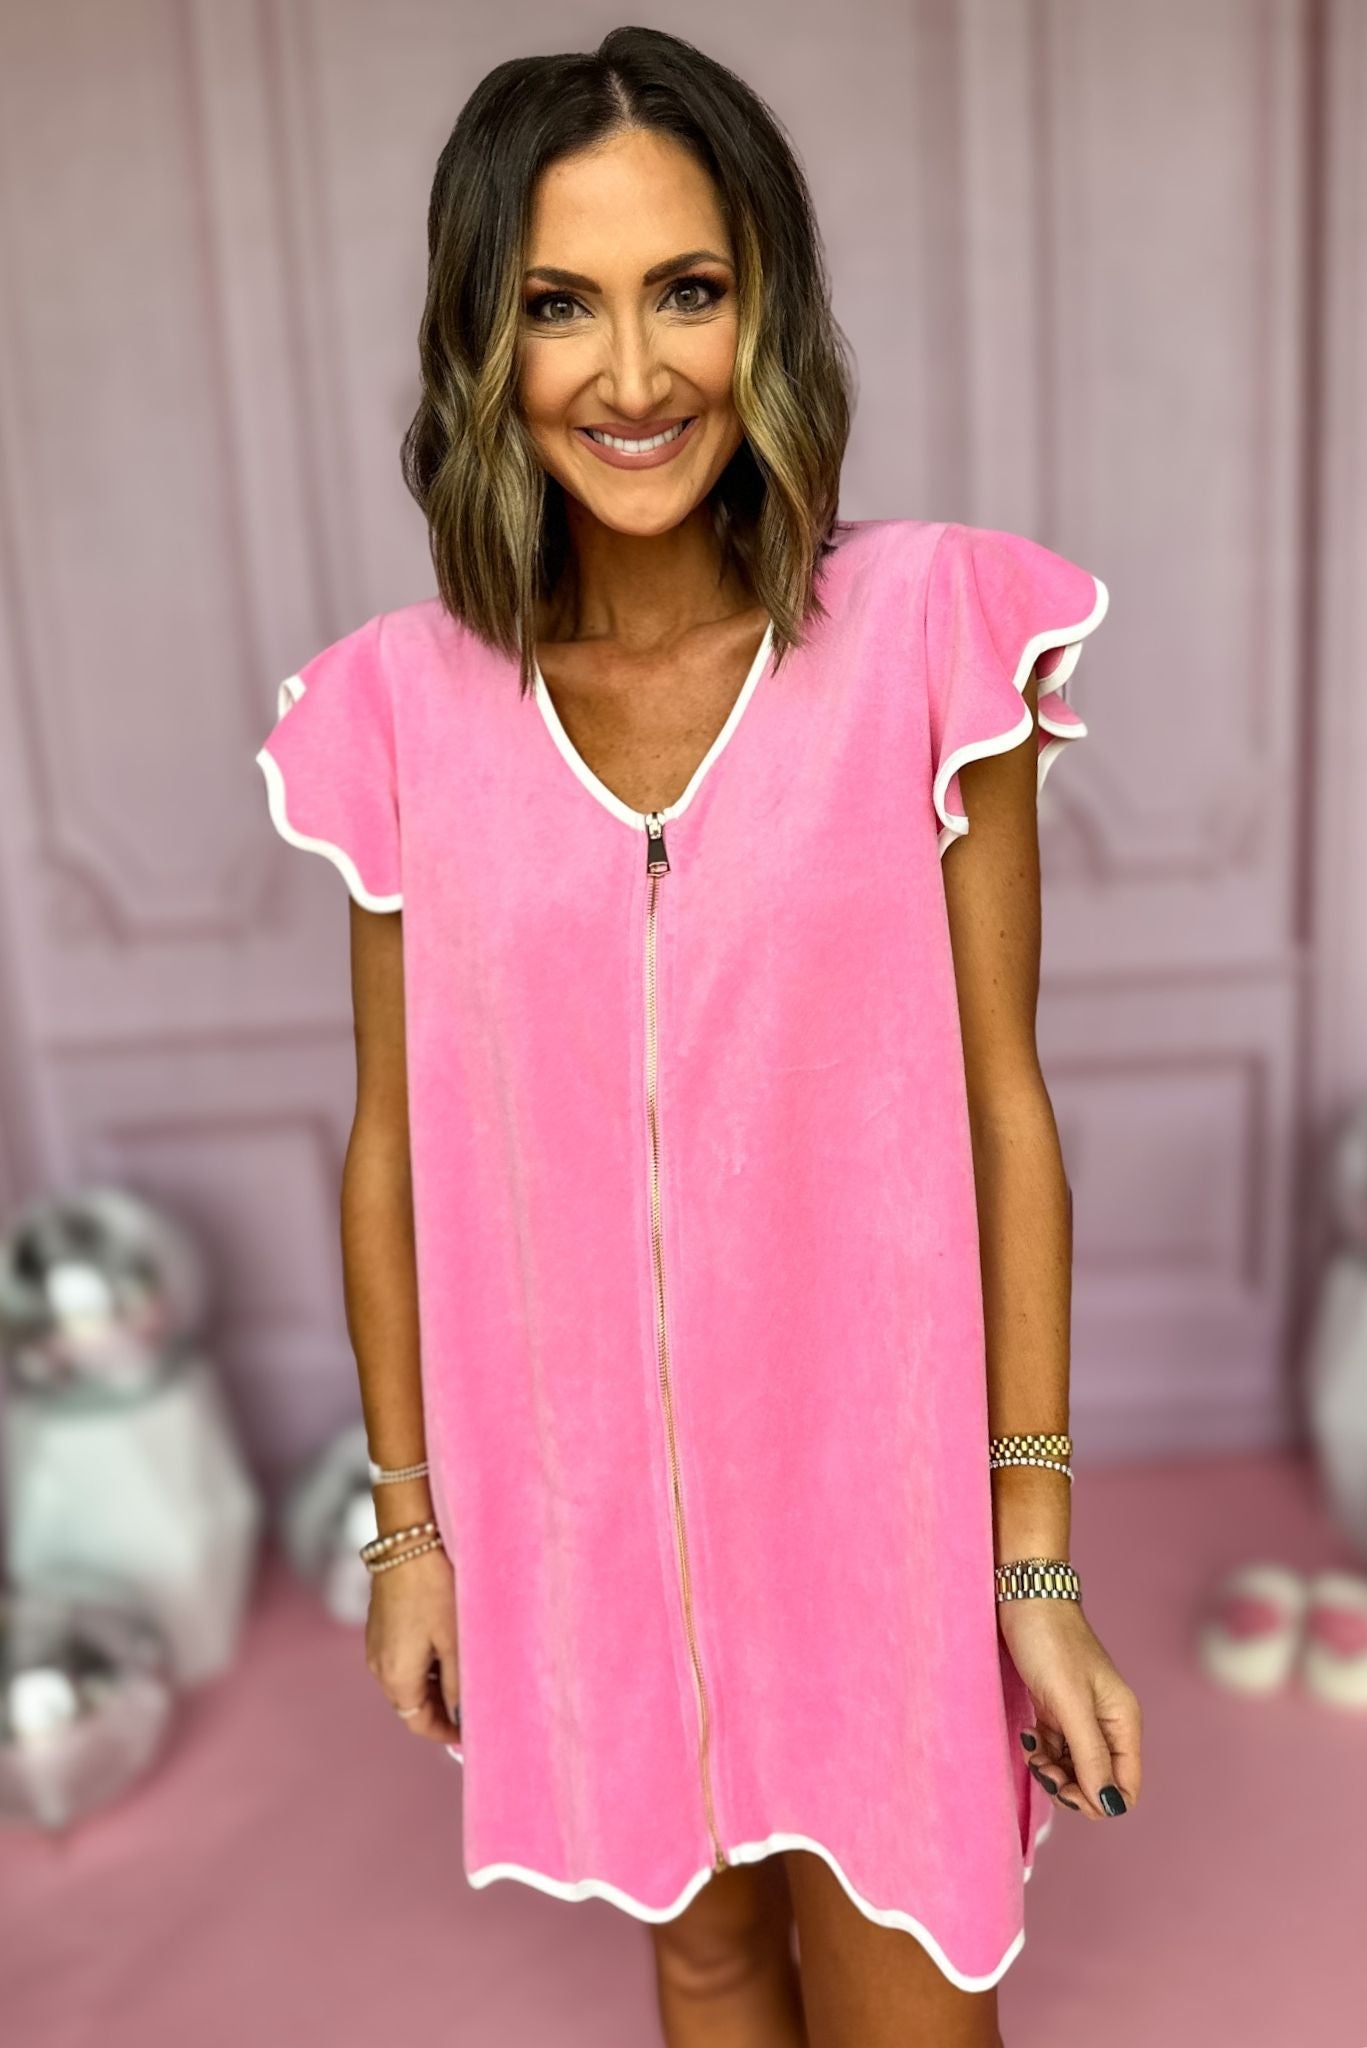 SSYS Bubblegum Pink Get Ready Robe™, SSYS the label, elevated robe, elevated get ready robe, must have robe, must have gift, elevated gift, mom style, elevated style, chic style, conventional style, shop style your senses by mallory fitzsimmons